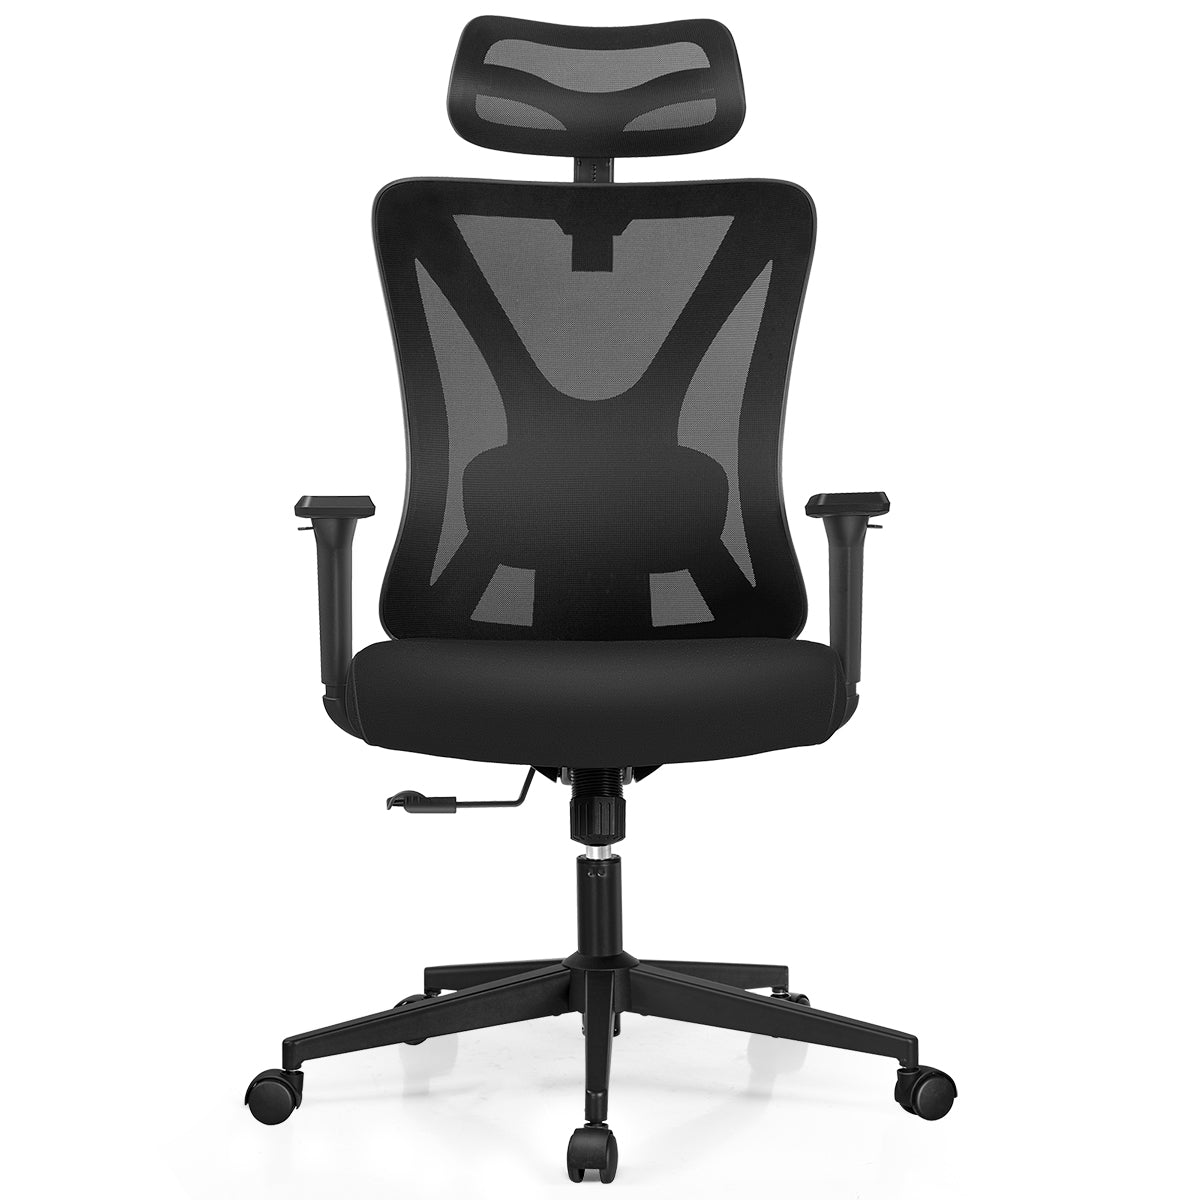 High Back Task Chair with Adjustable Lumbar Support